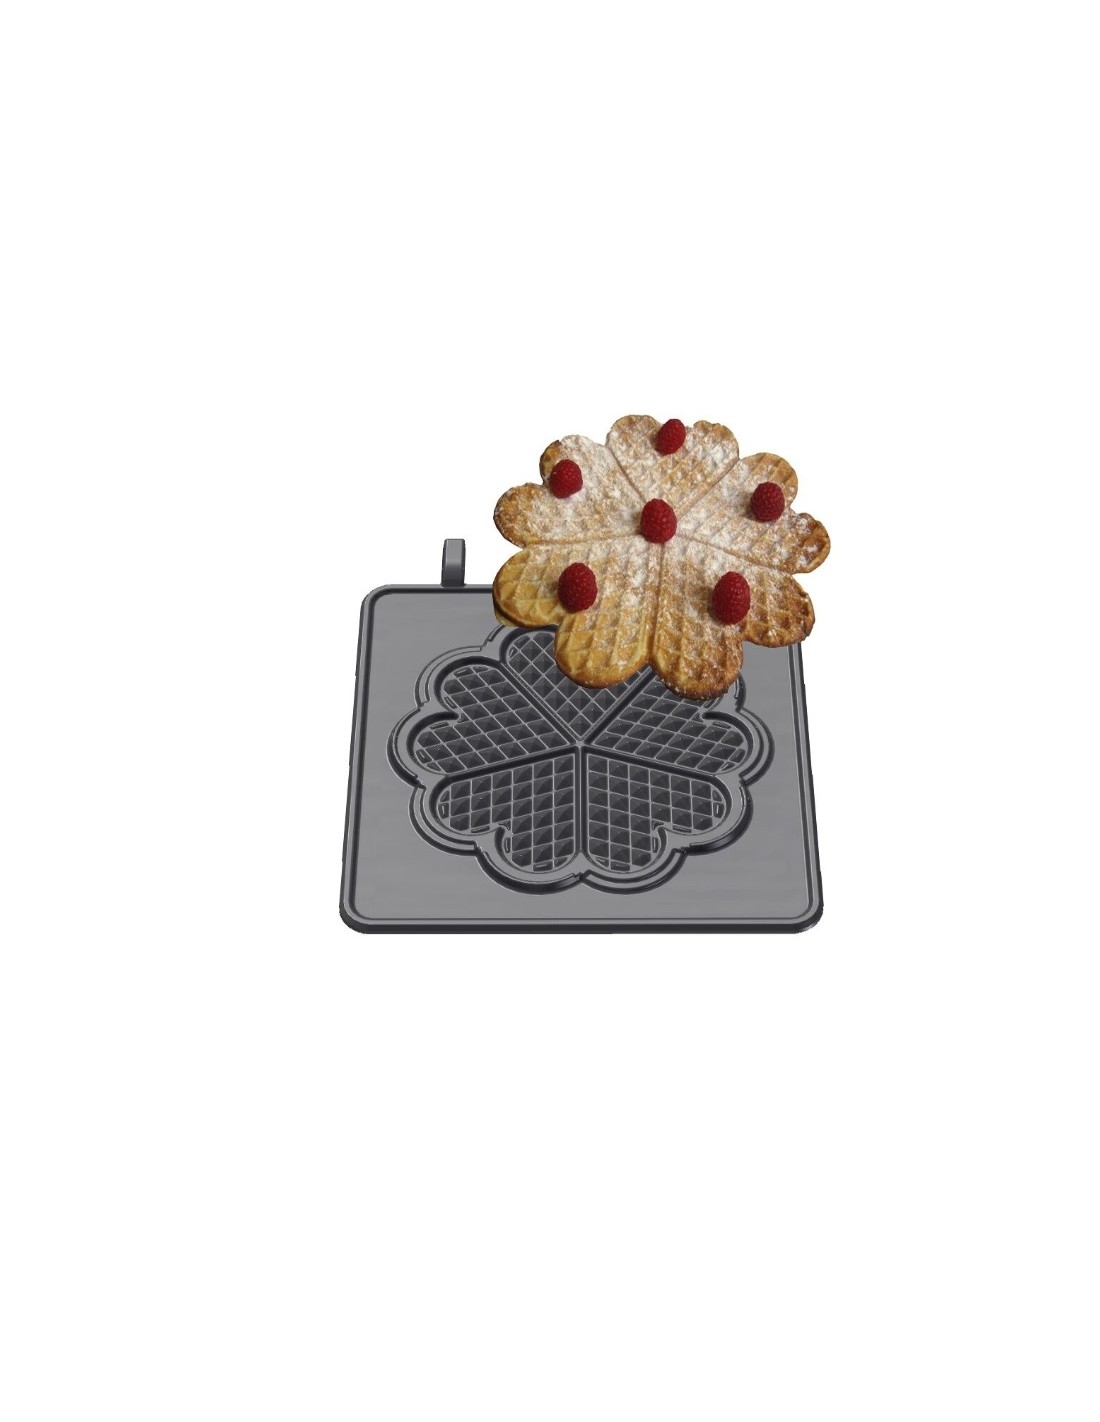 Interchangeable waffel plate - shape: 1 waffel Ø 21 x 0.5 cm - divisible in 5 pieces - Cast iron